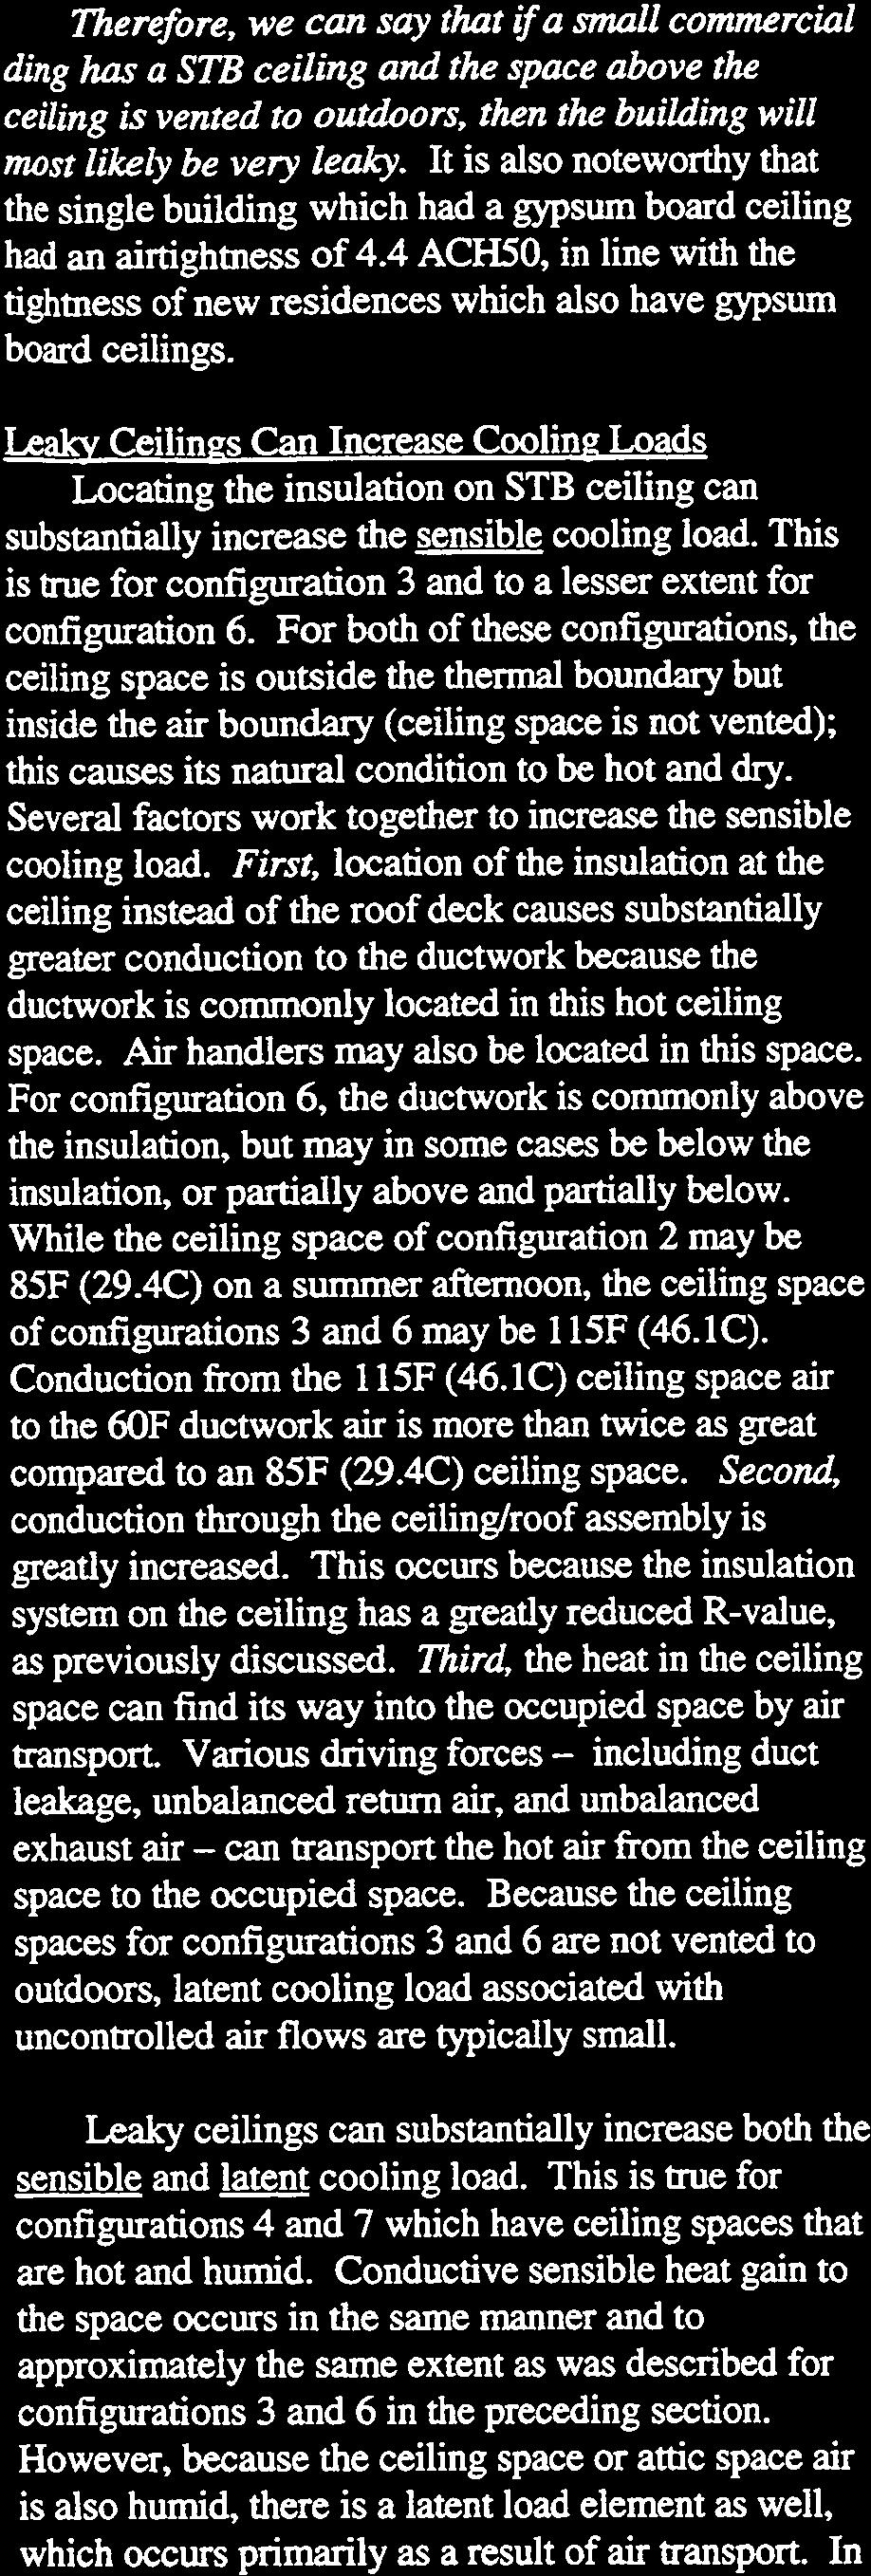 Therefore, we can say that ifa small commercial ding has a STB ceiling and the space above the ceiling is vented to outdoors, then the building will most likely be very leaky.